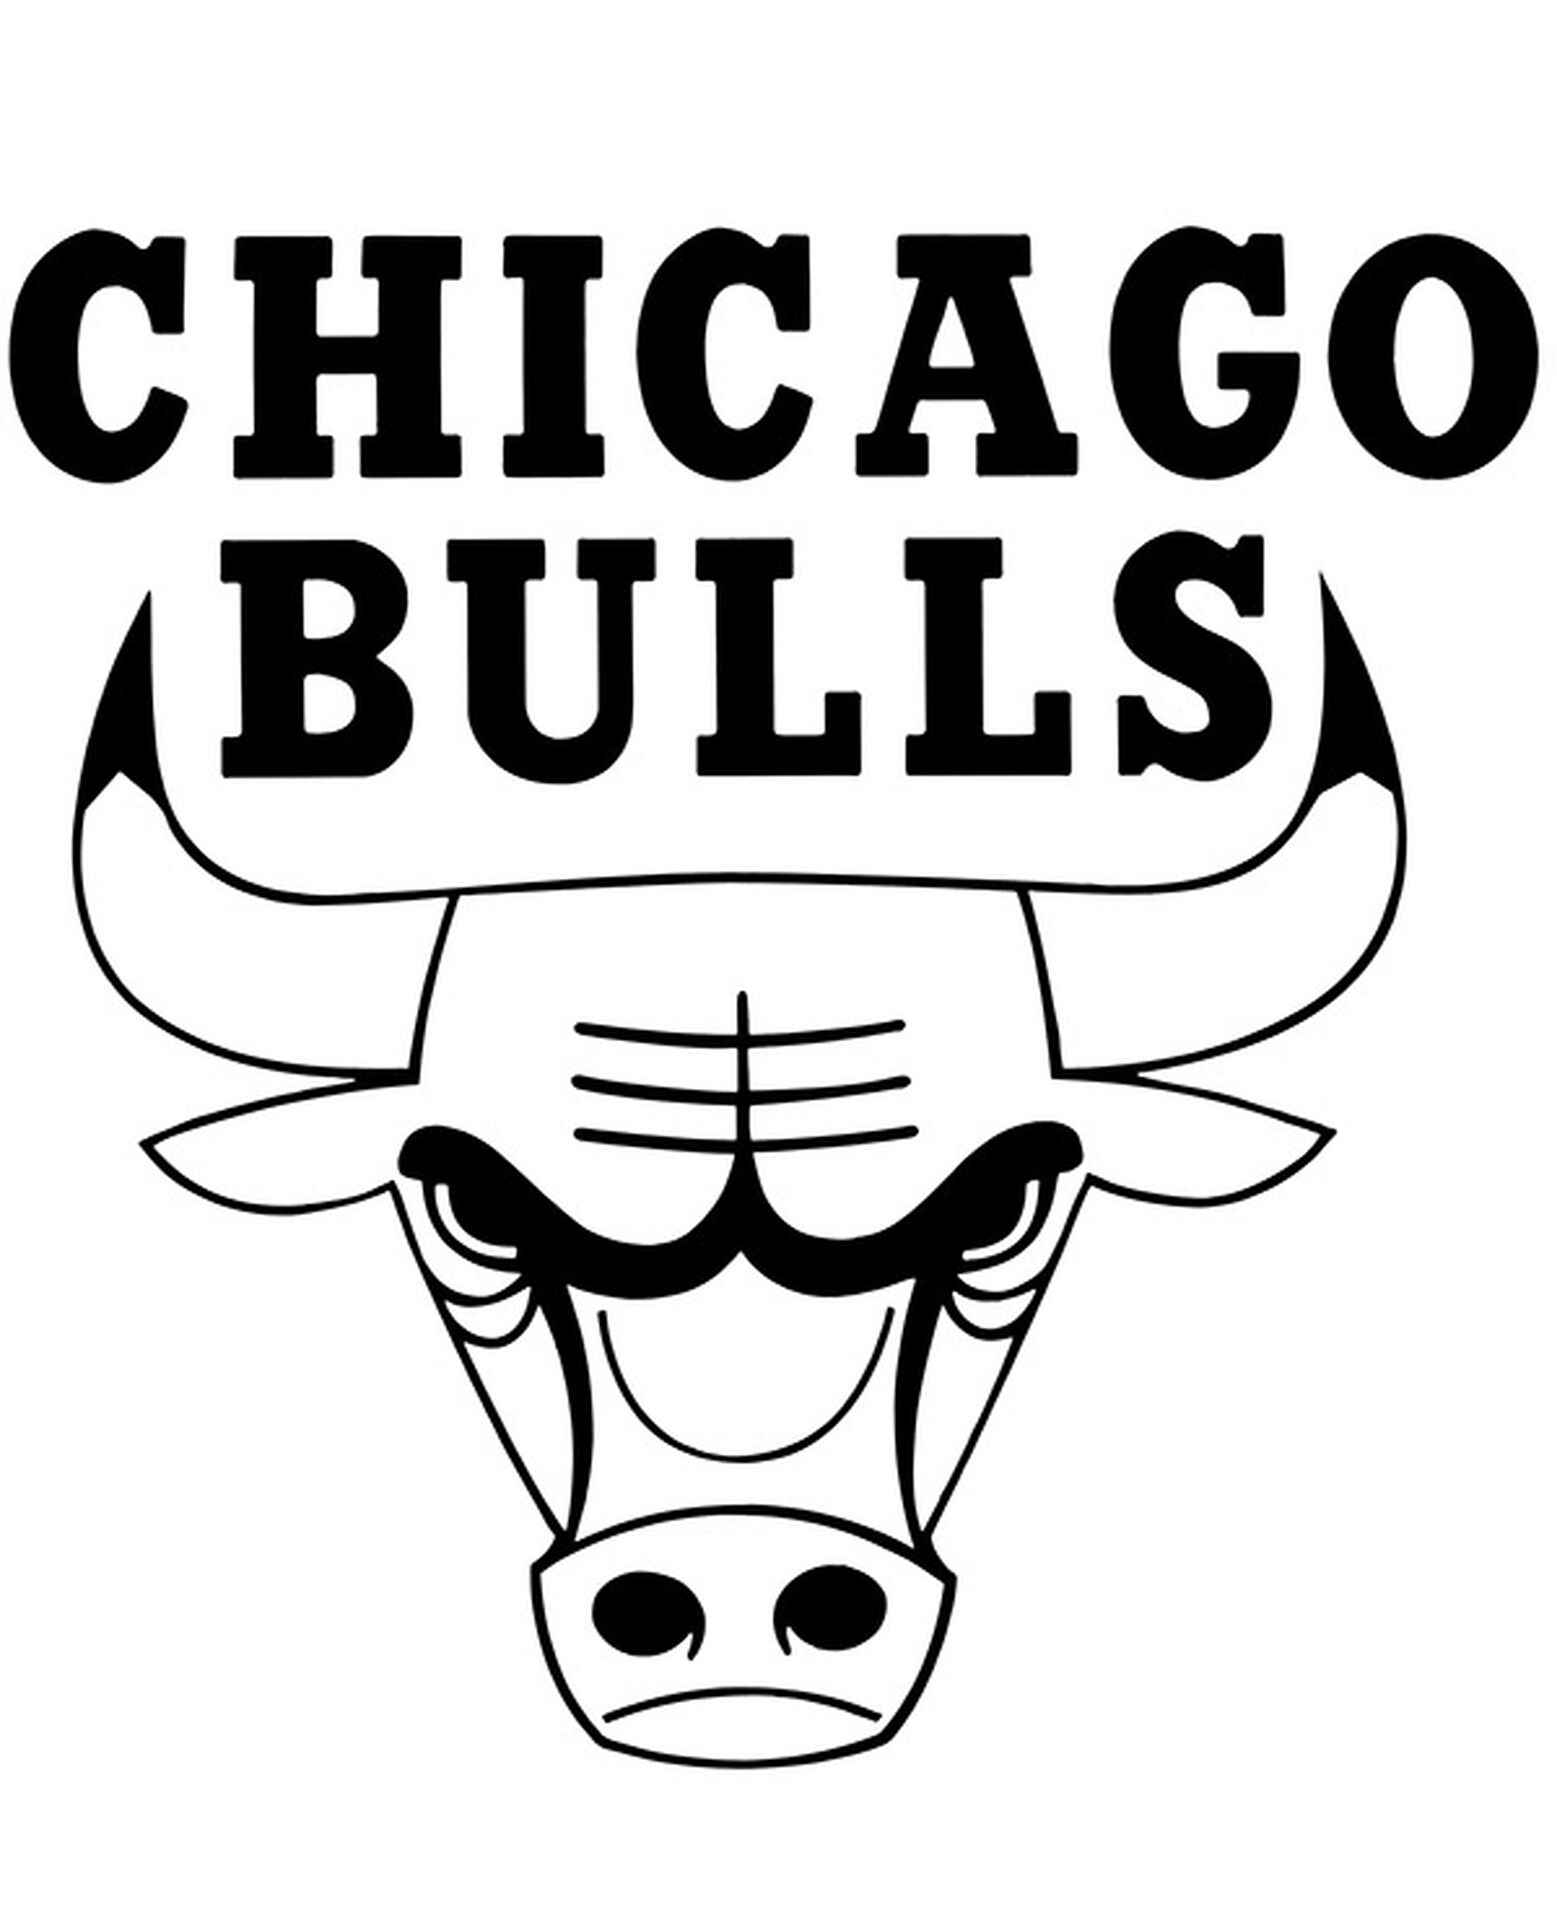 chicago bulls logo coloring page